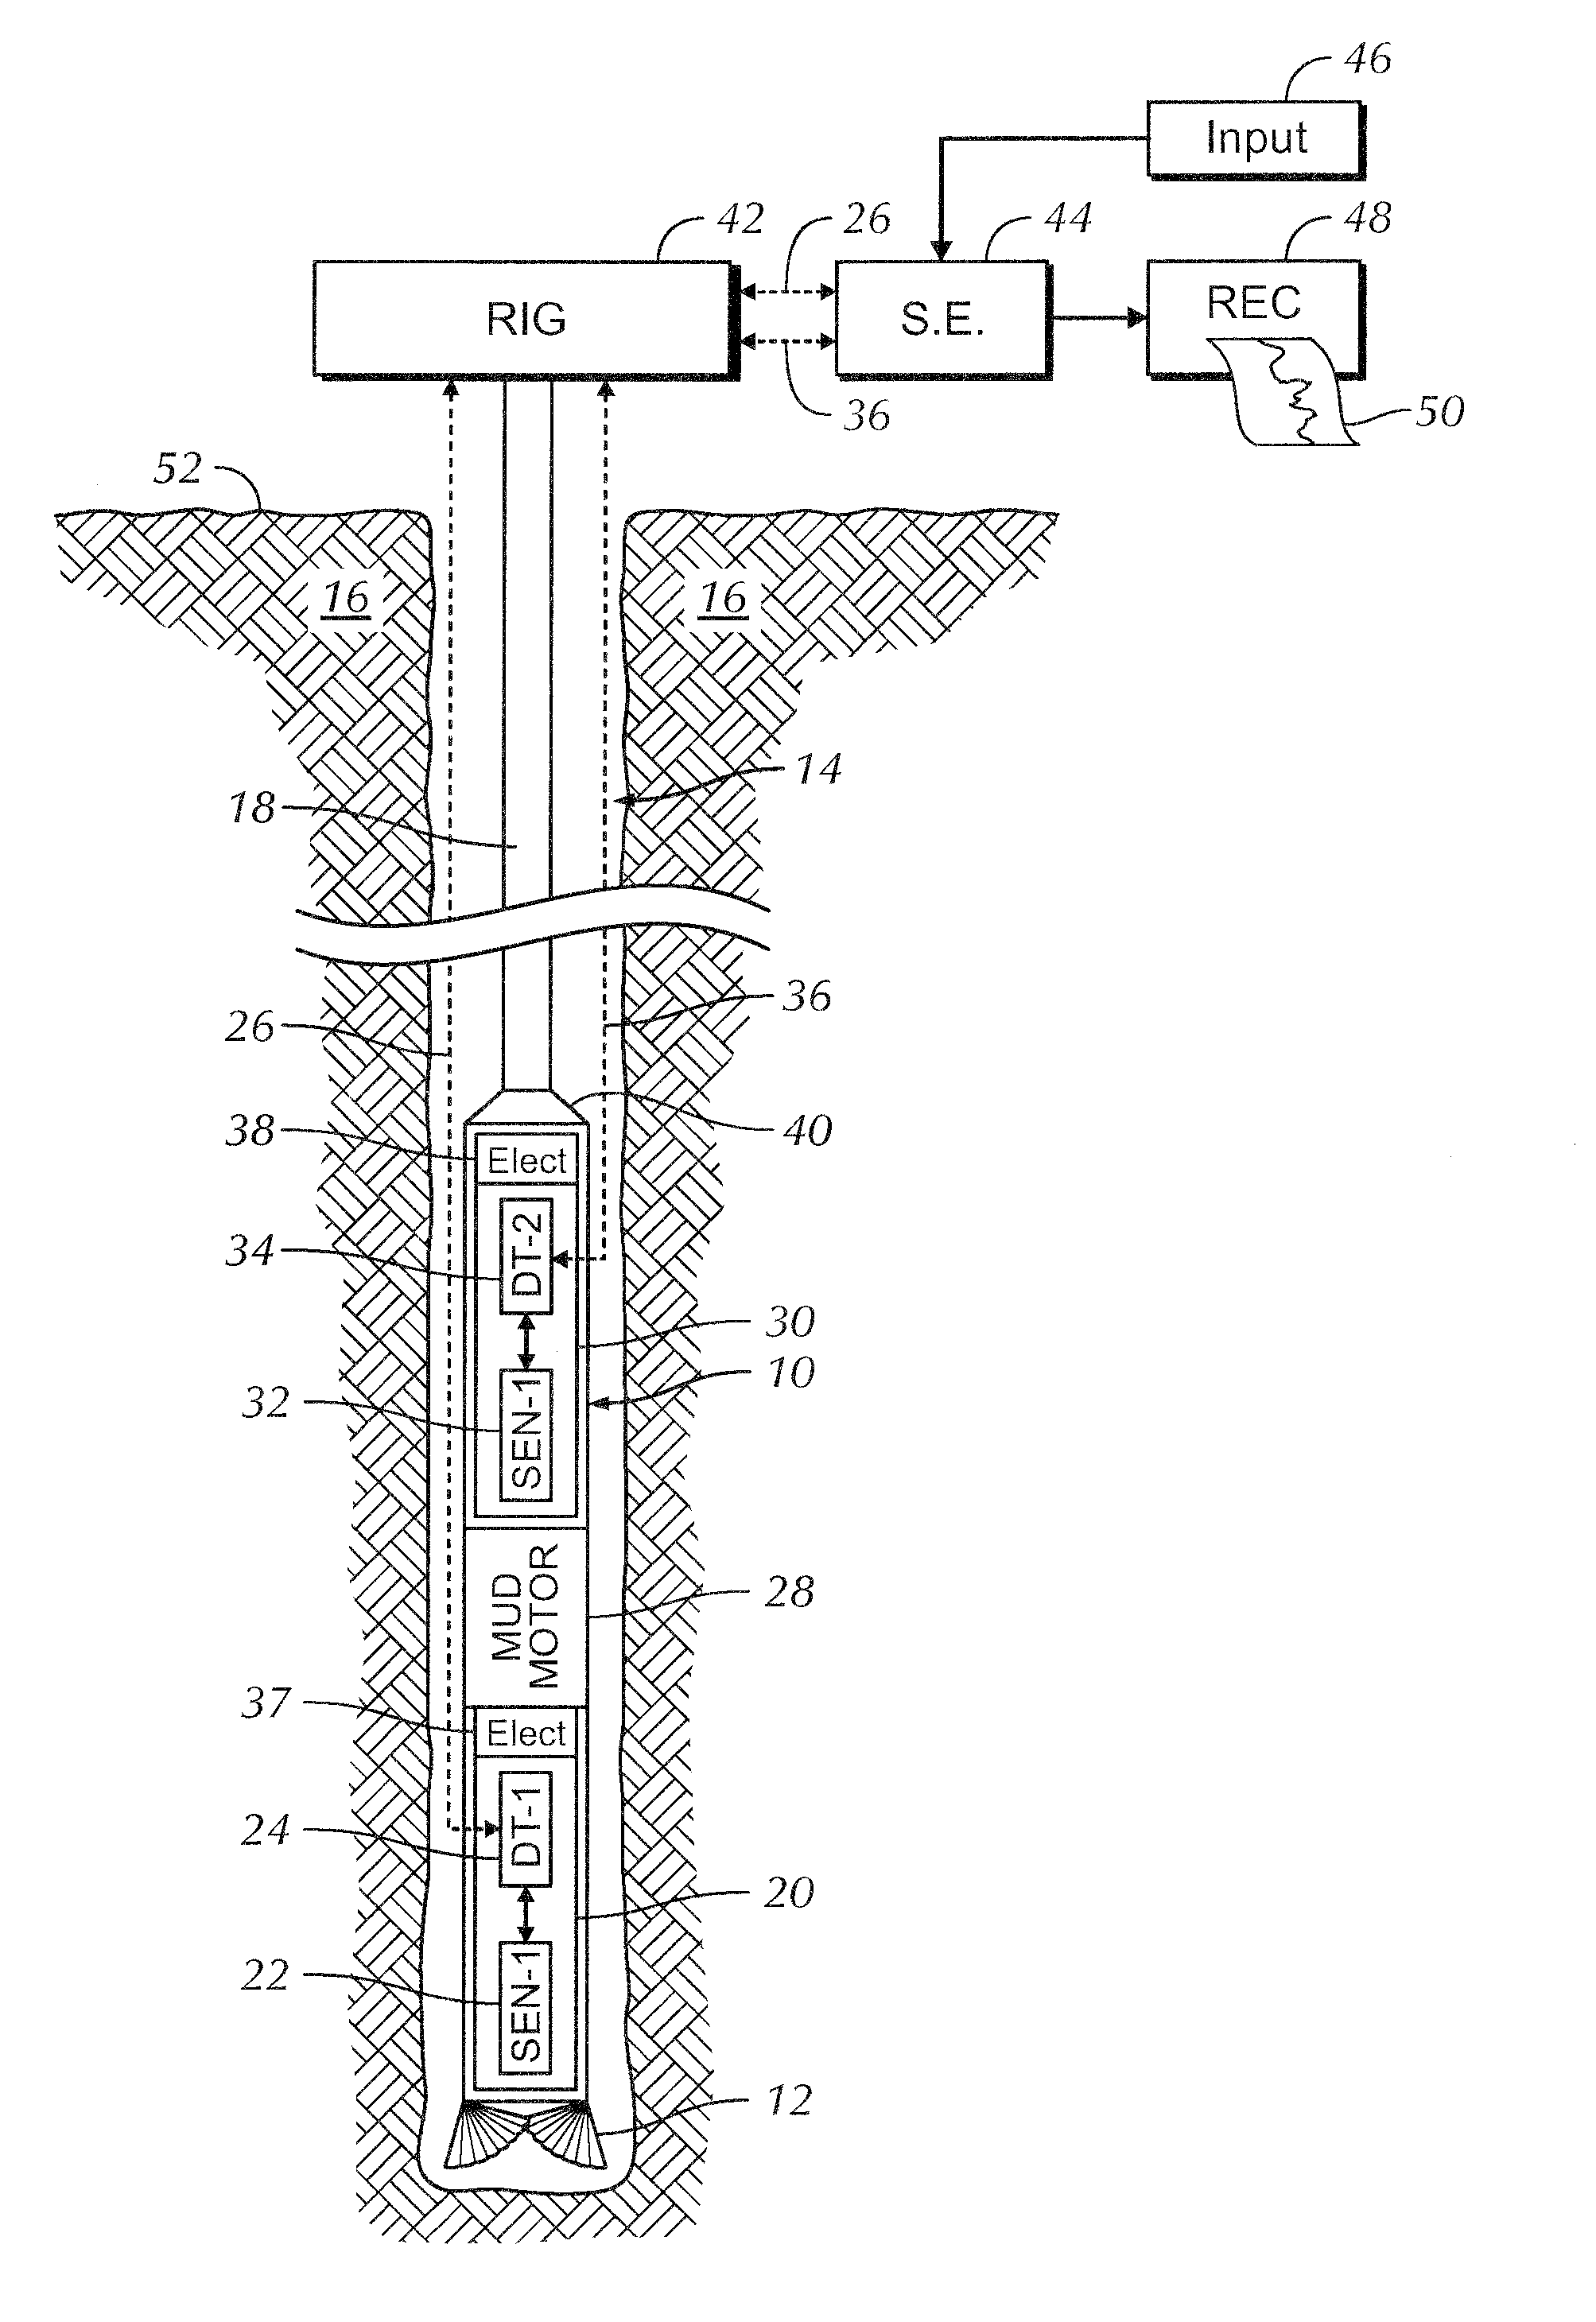 Drilling system comprising a plurality of borehole telemetry systems